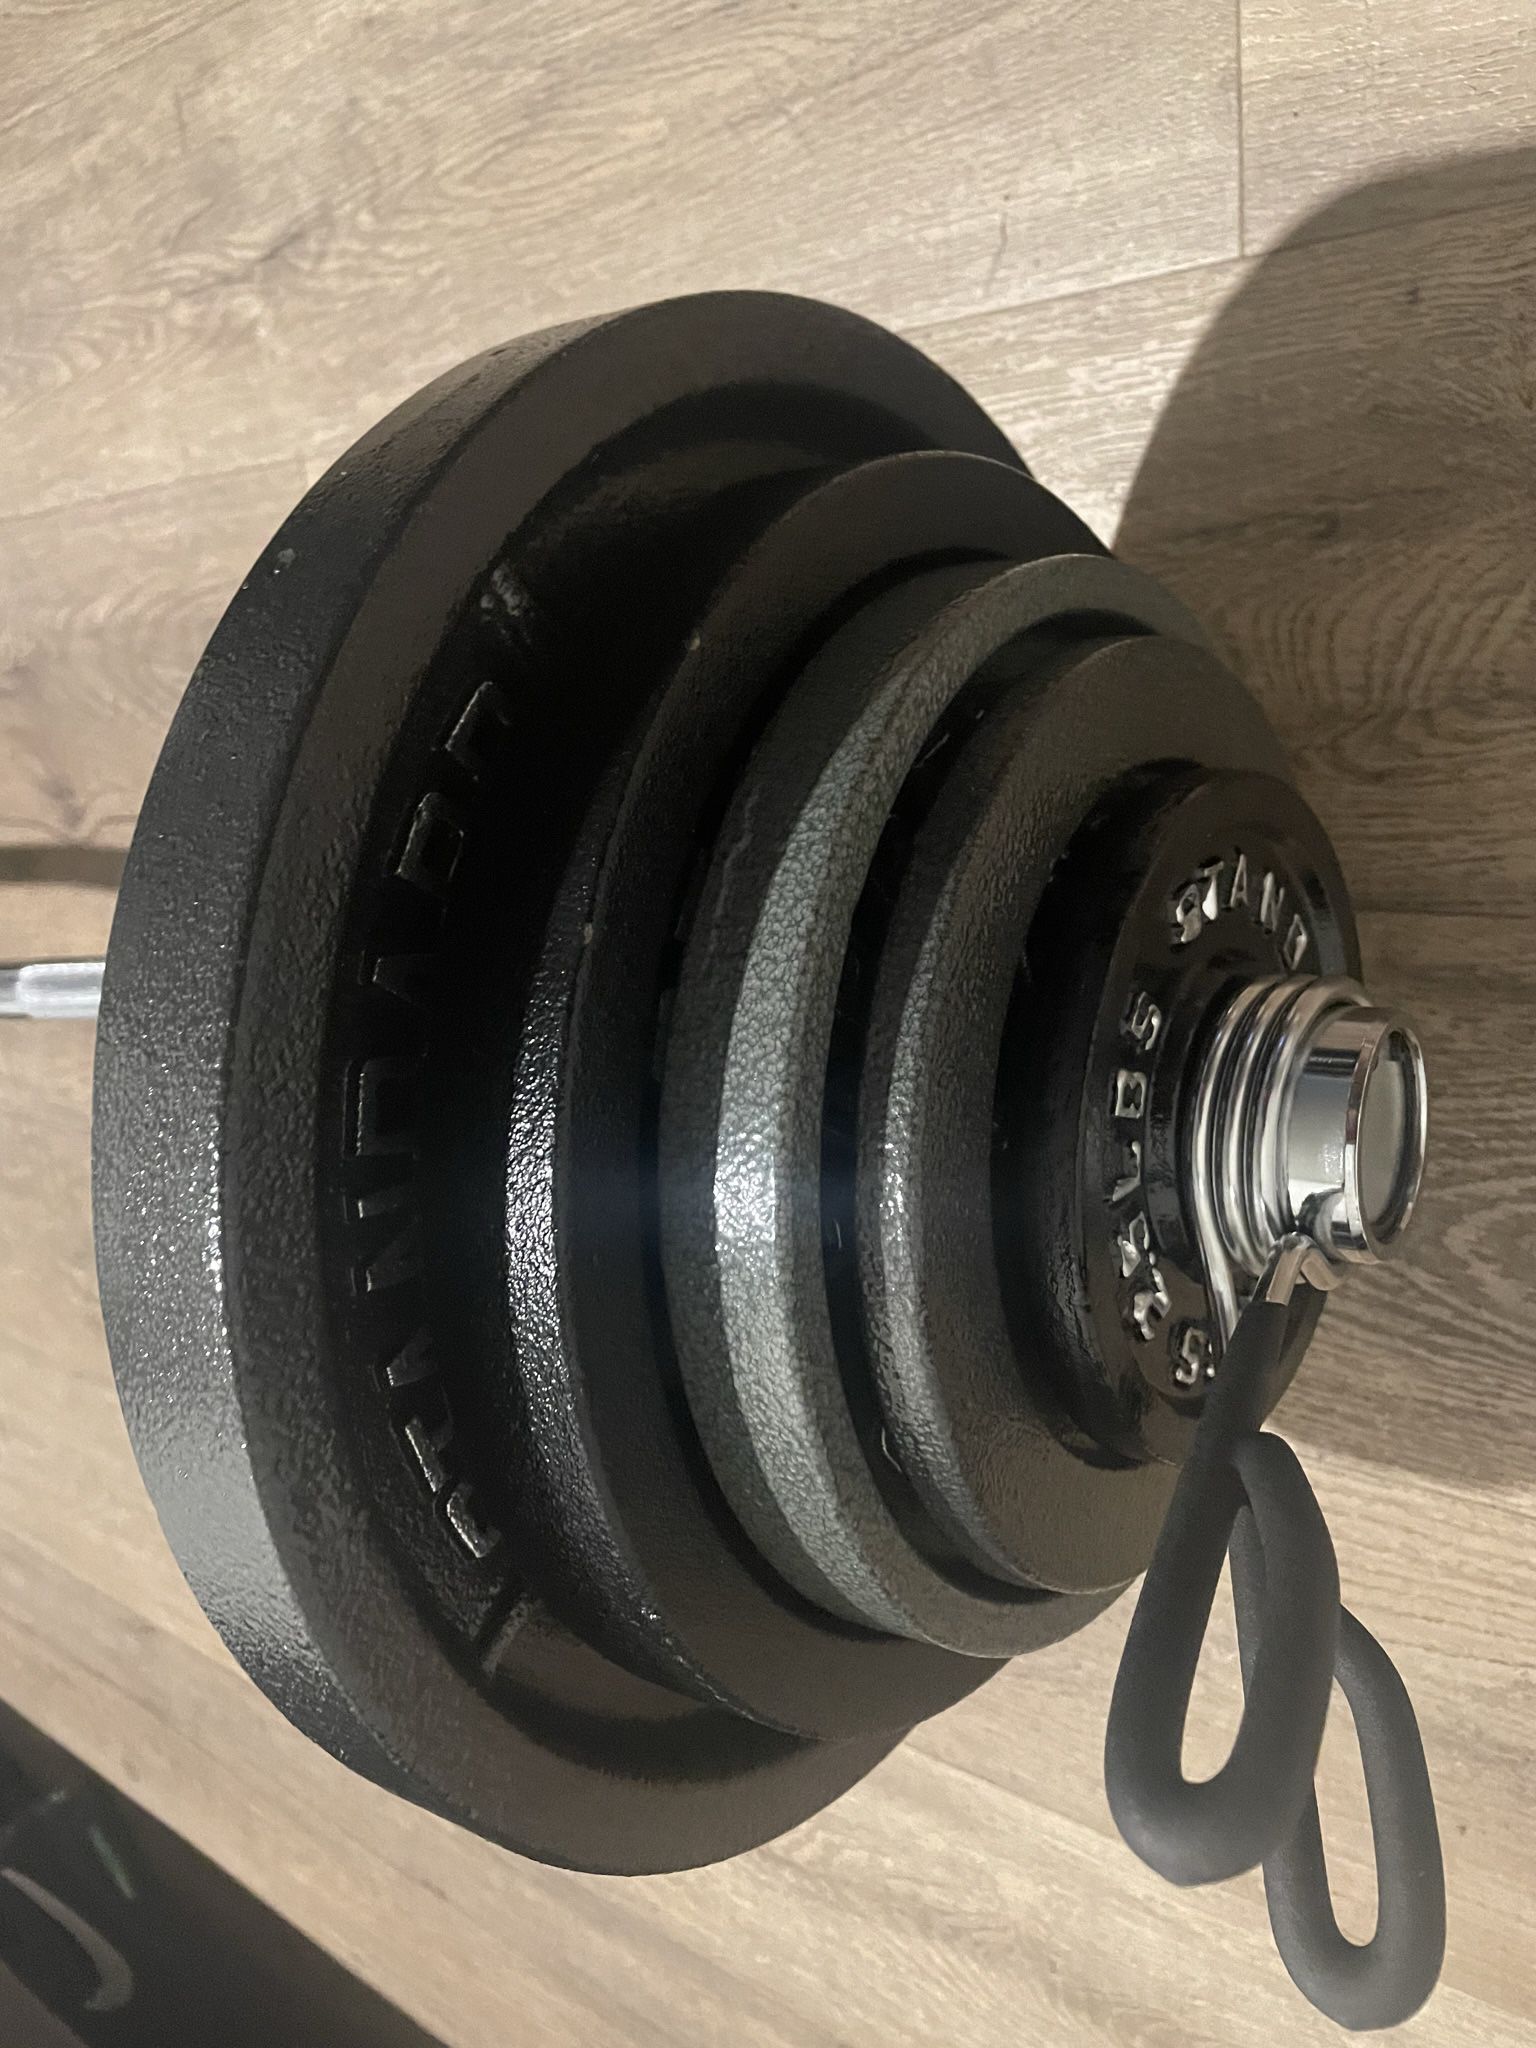 Brand NEW Olympic Curl Bar &  Weight Plates.  Total: 175 lbs